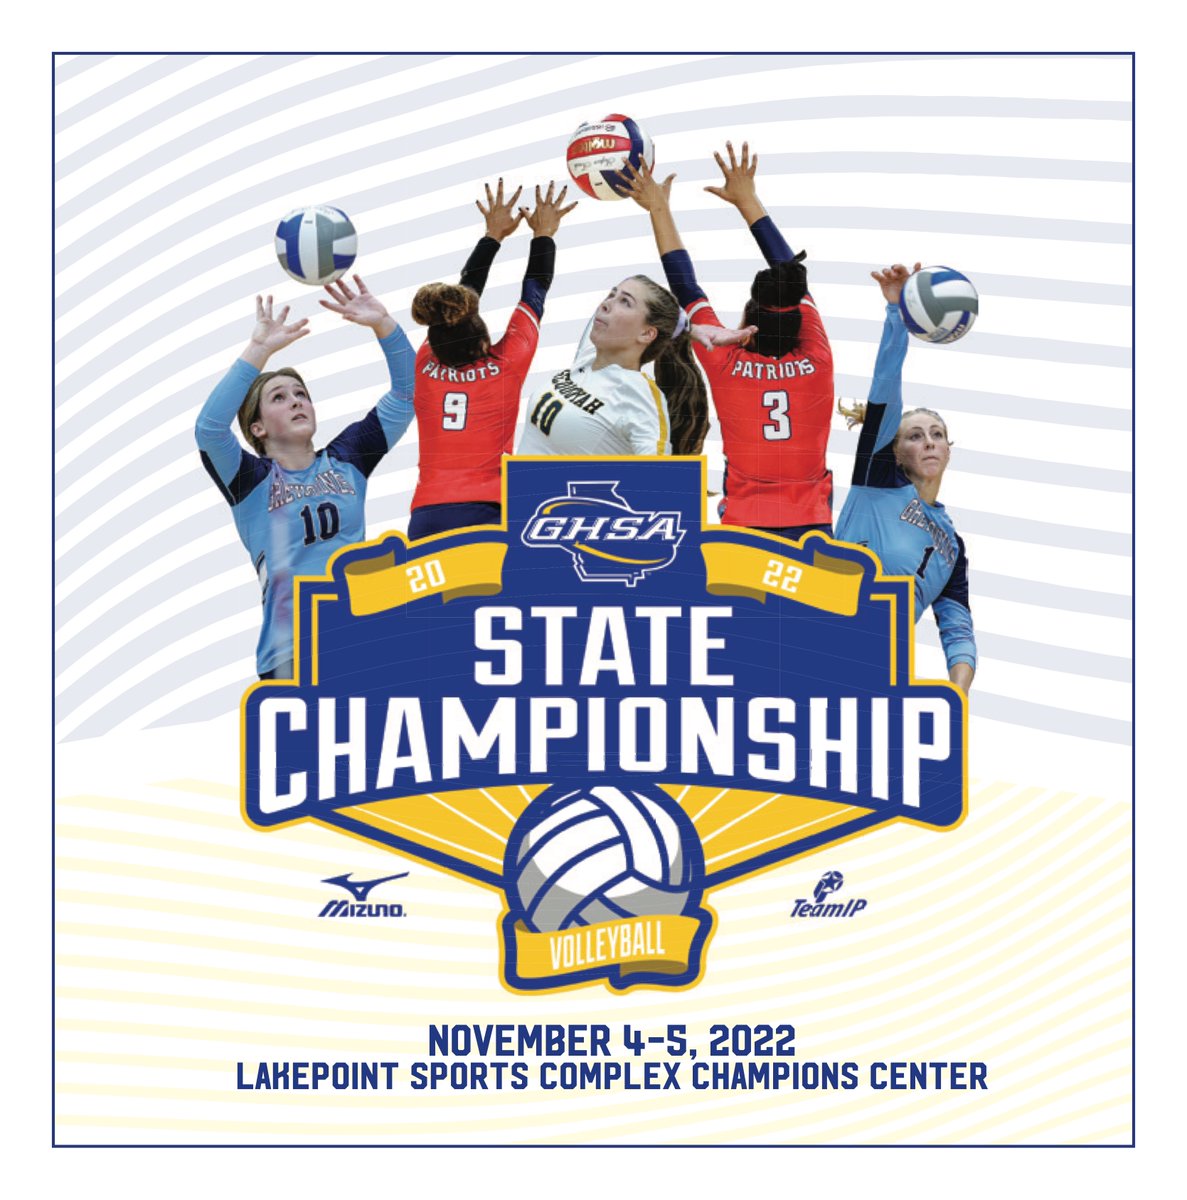 ICYMI....View / download Volleyball State Championship @mizunovolleyusa digital fan guide with preview, rosters, brackets & much more. Produced by @scoreatlanta bit.ly/3zF1o2M